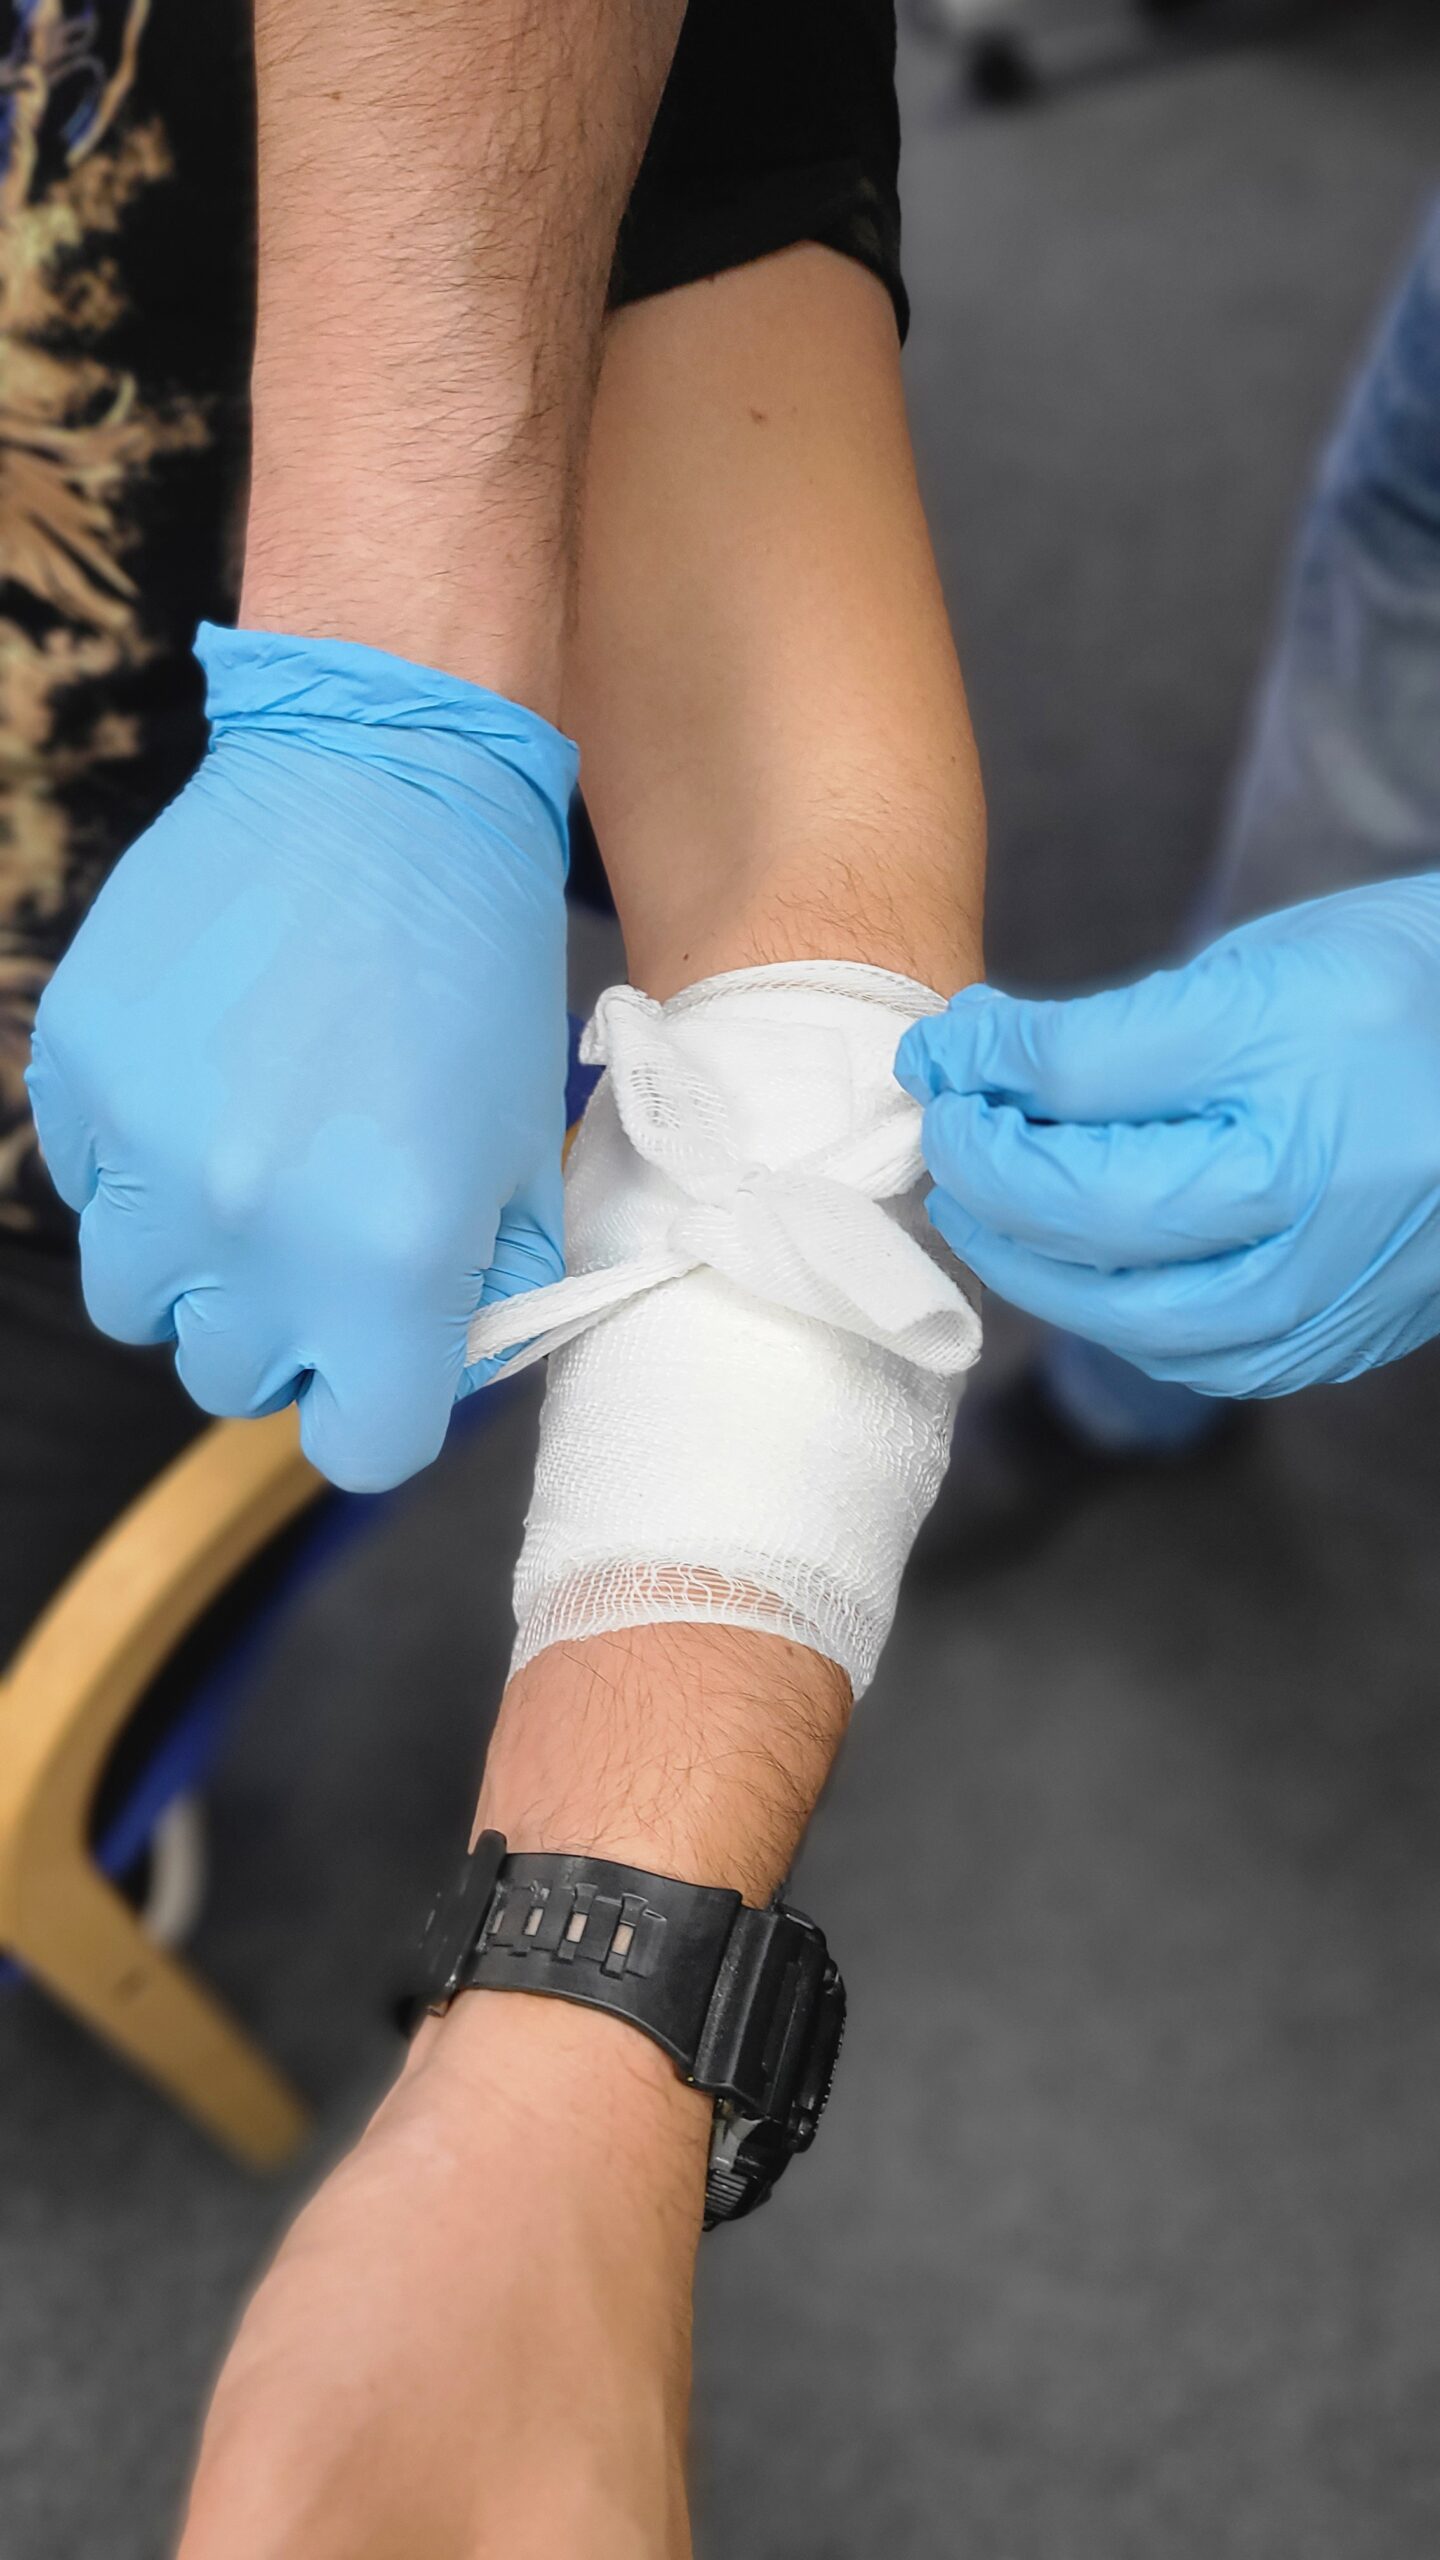 First aid training on dressing an arm wound